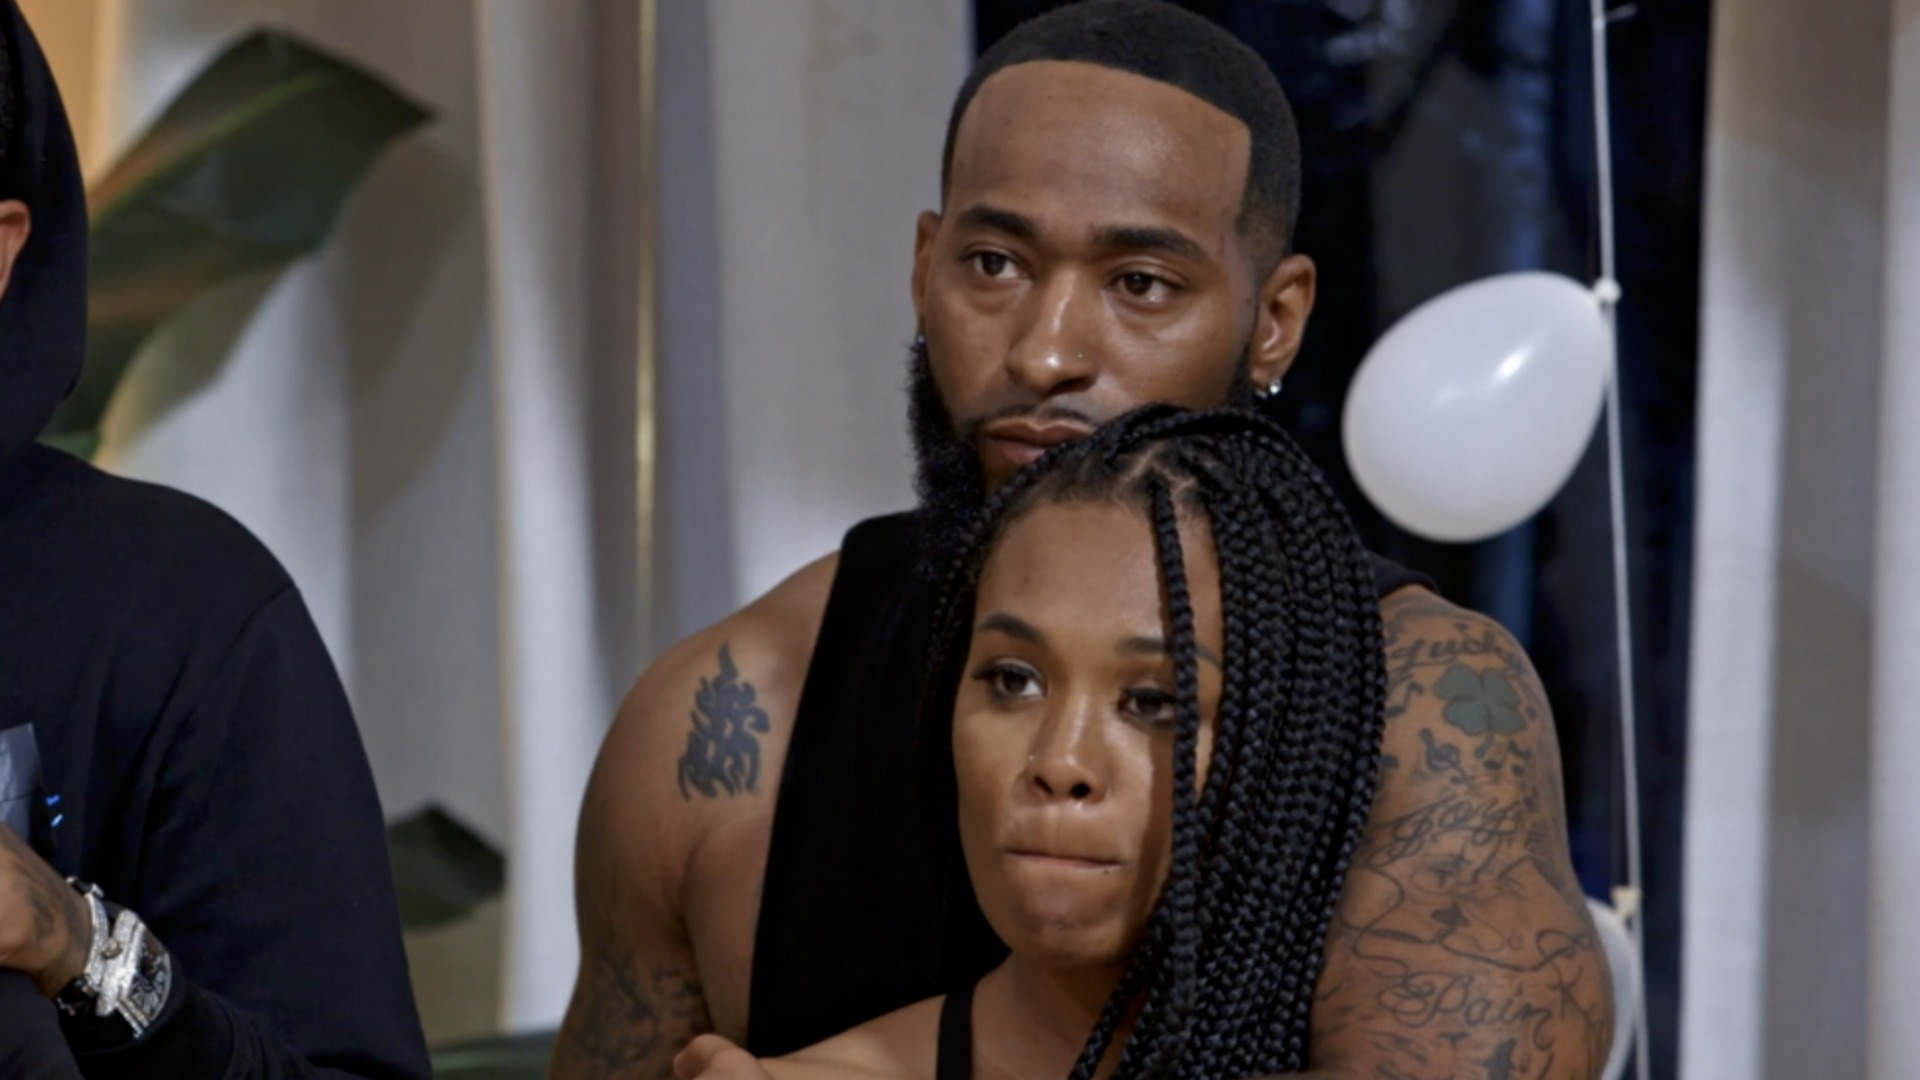 Watch Sneak Peek: Jealousy Strikes a Fight! | Marriage Boot Camp: Hip Hop Edition Video Extras